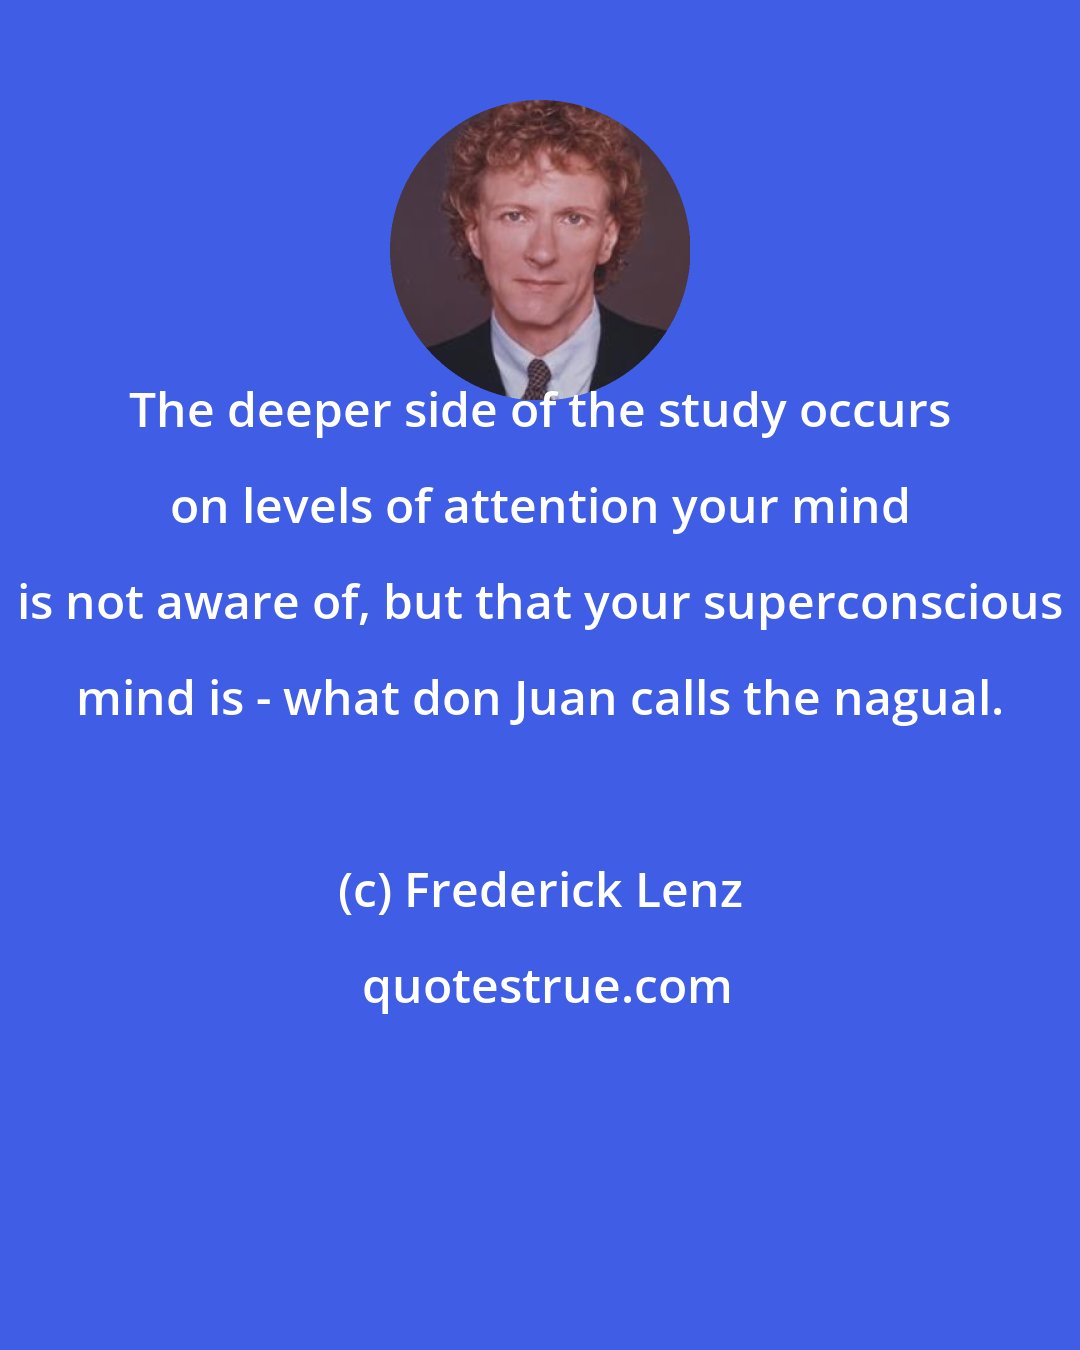 Frederick Lenz: The deeper side of the study occurs on levels of attention your mind is not aware of, but that your superconscious mind is - what don Juan calls the nagual.